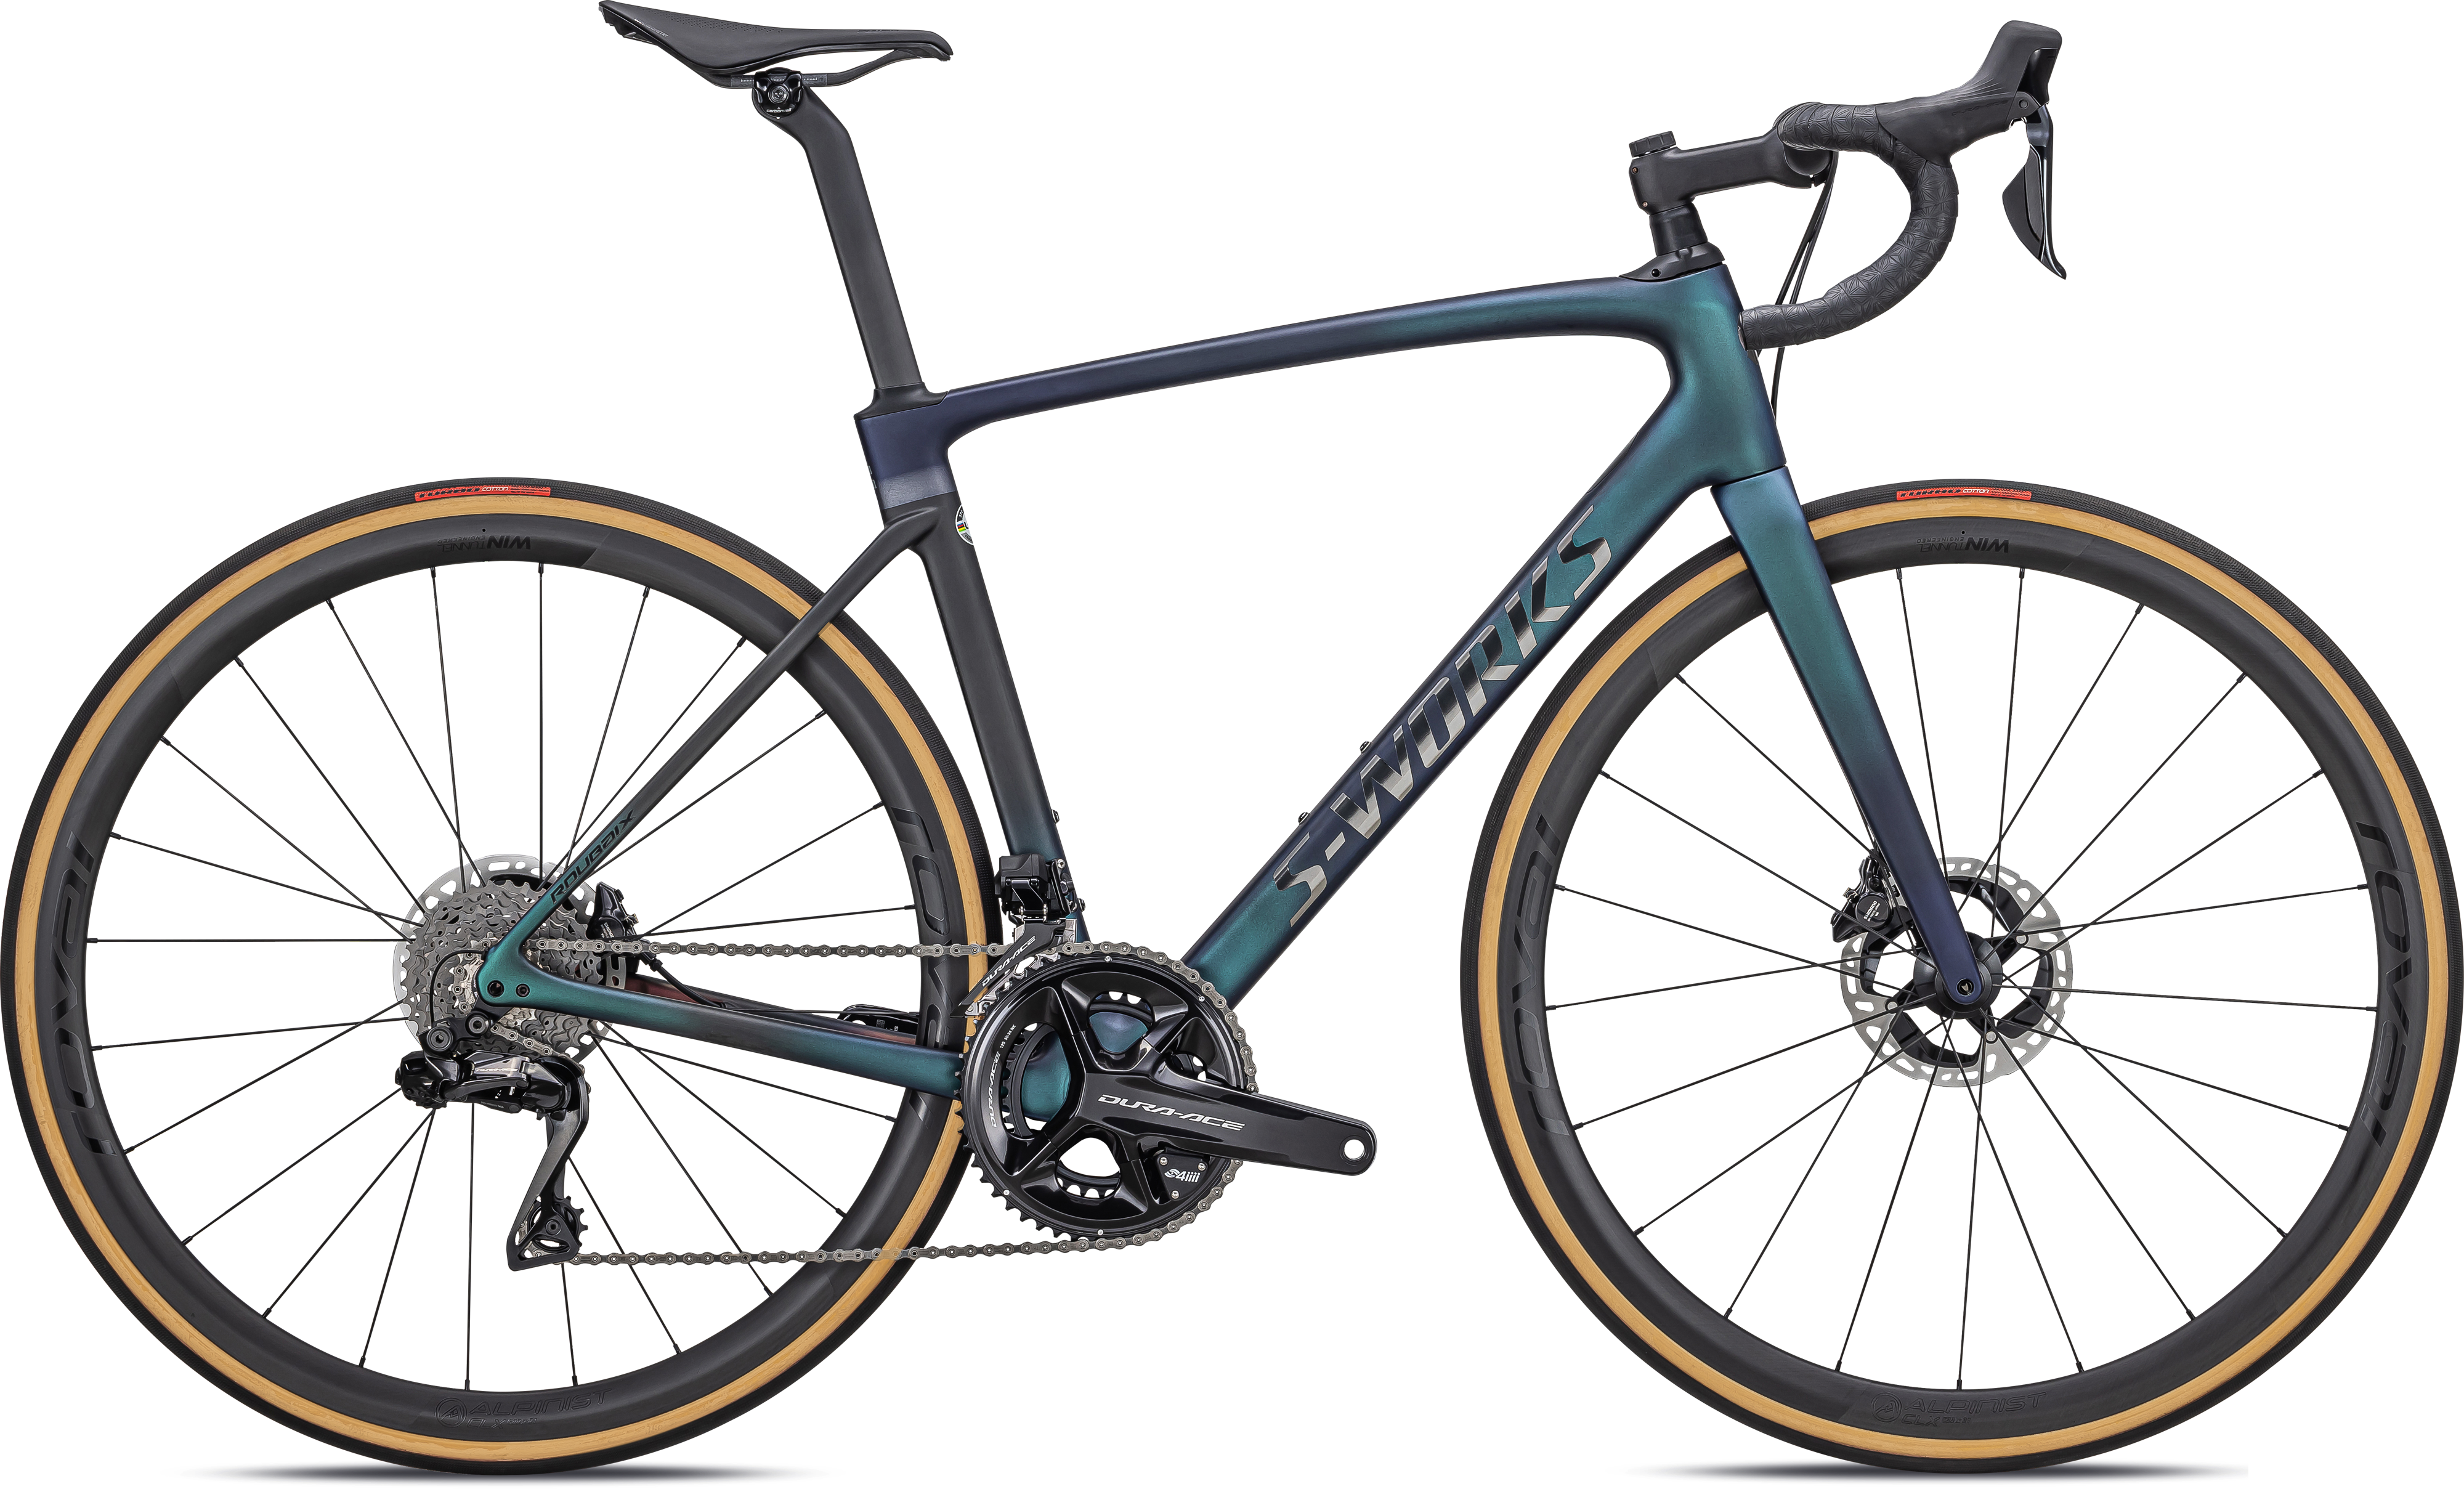 S-Works Roubaix with Shimano Dura-Ace Di2